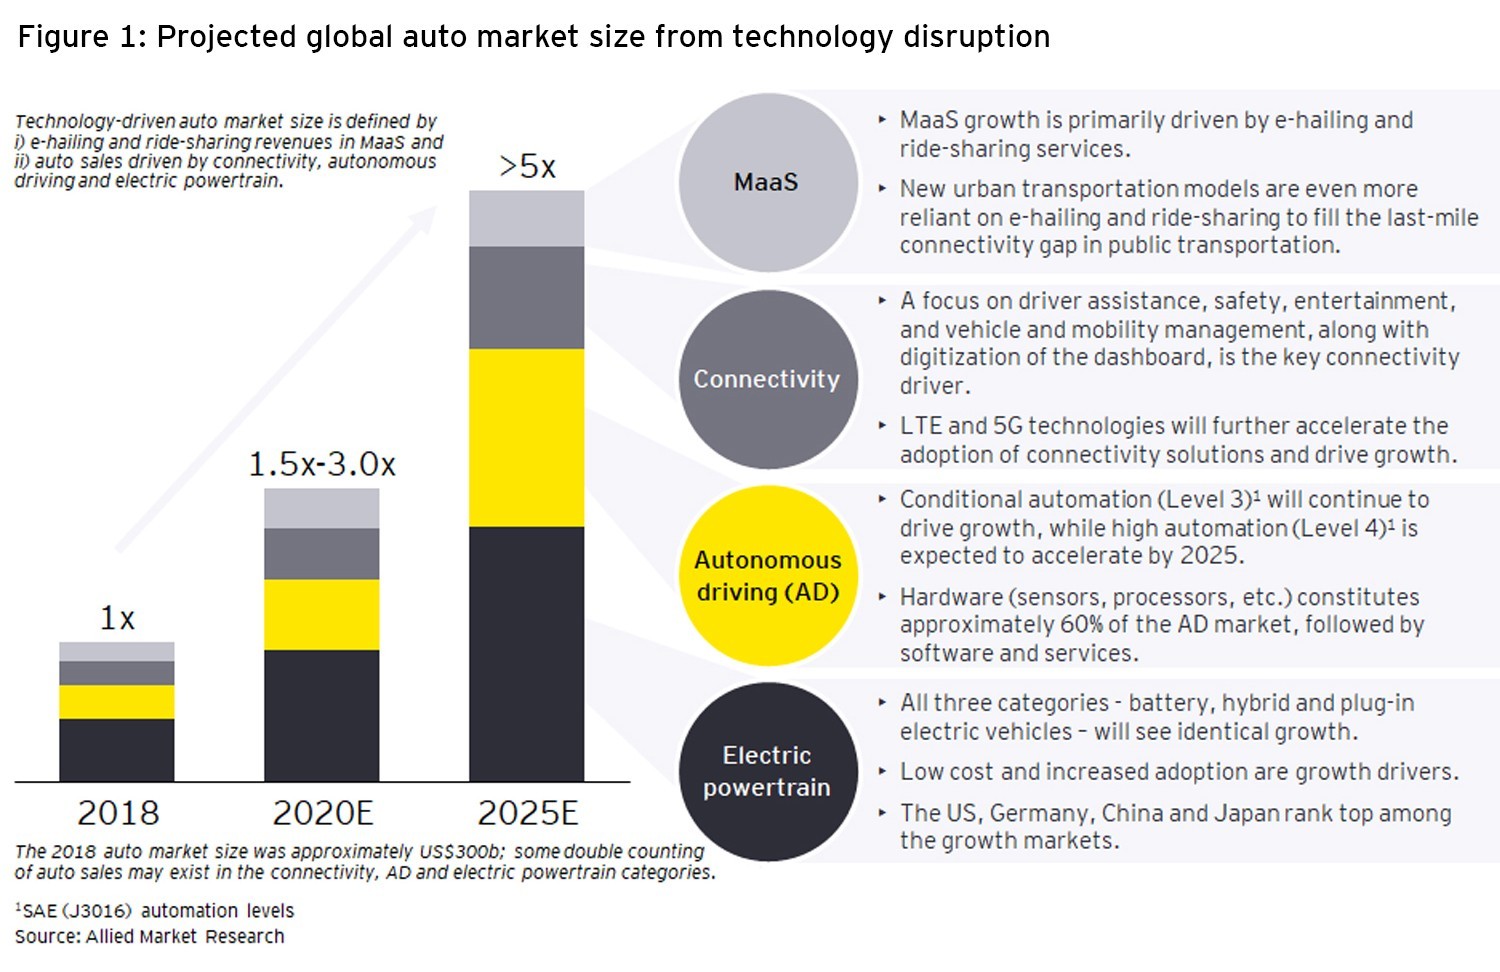 Projected global auto market size from technology disruption